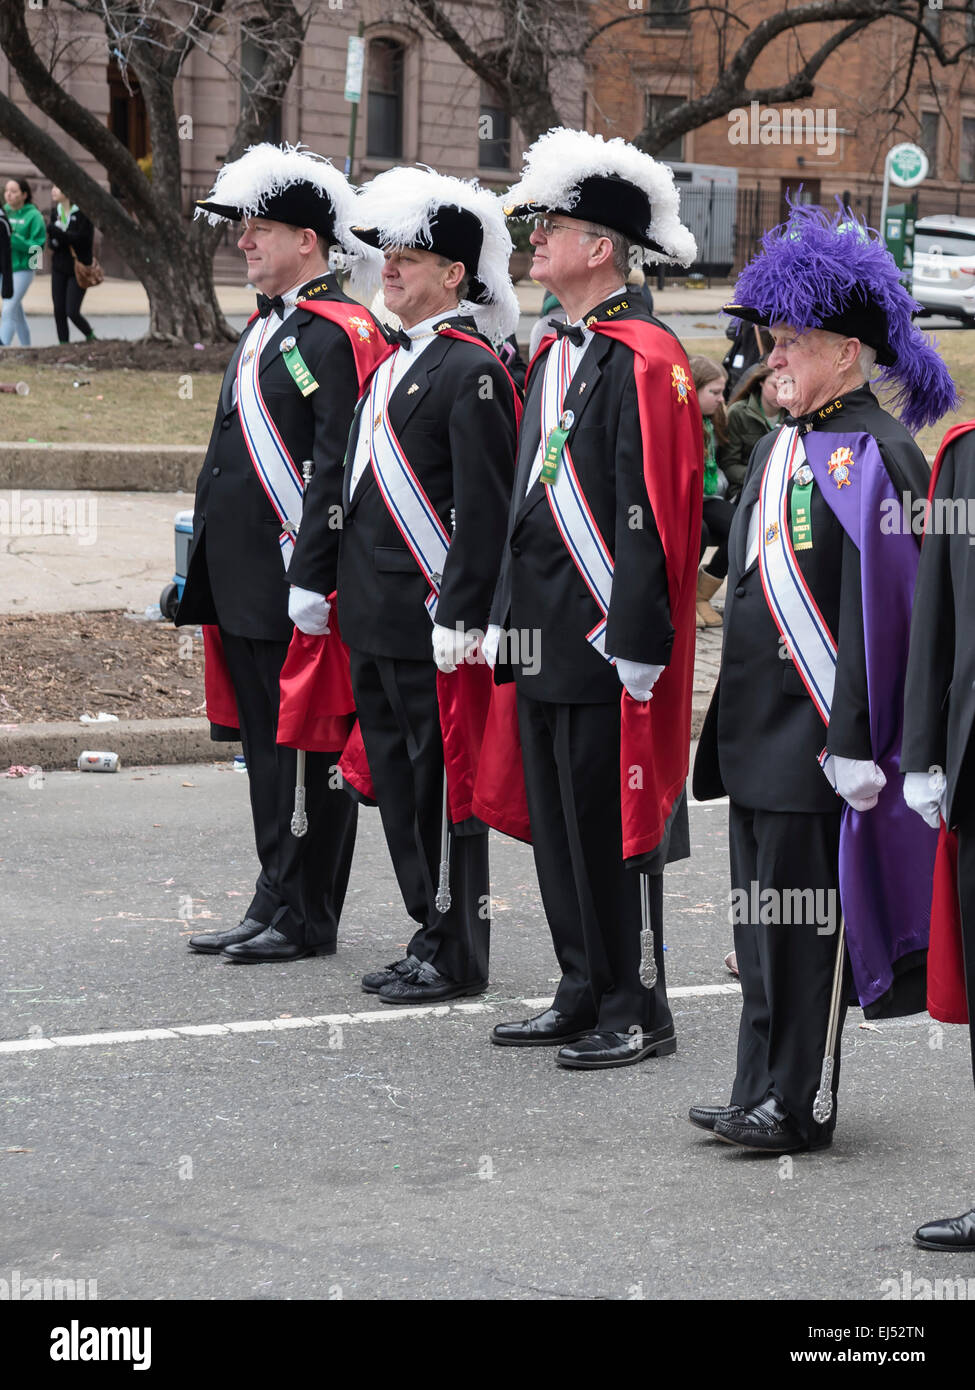 Four Honored guests in formal attire, St. Patrick's Day Parade, Philadelphia, USA Stock Photo